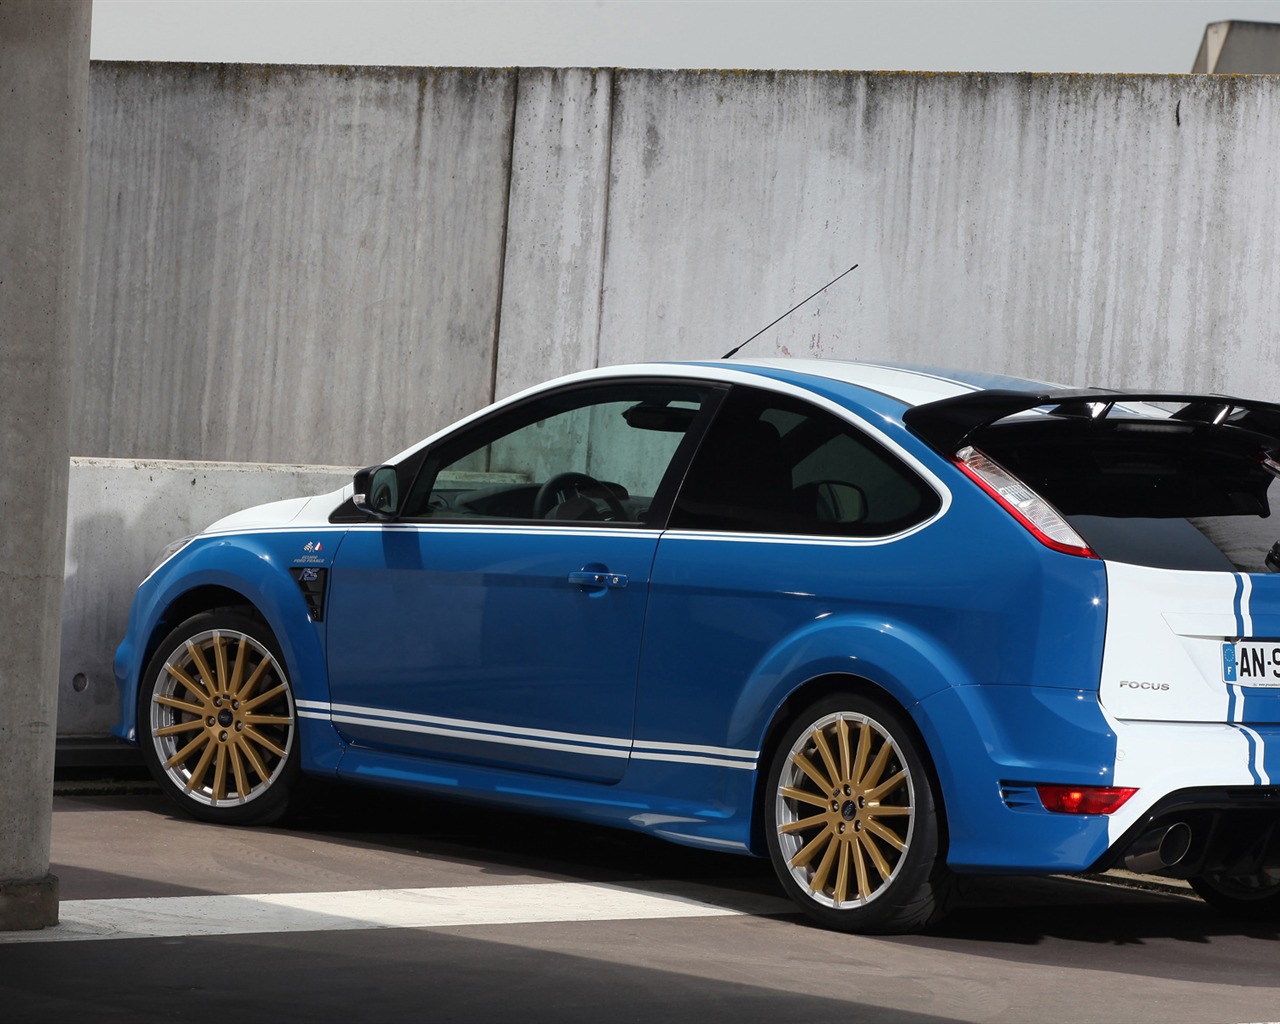 Ford Focus RS Le Mans Classic - 2010 福特5 - 1280x1024